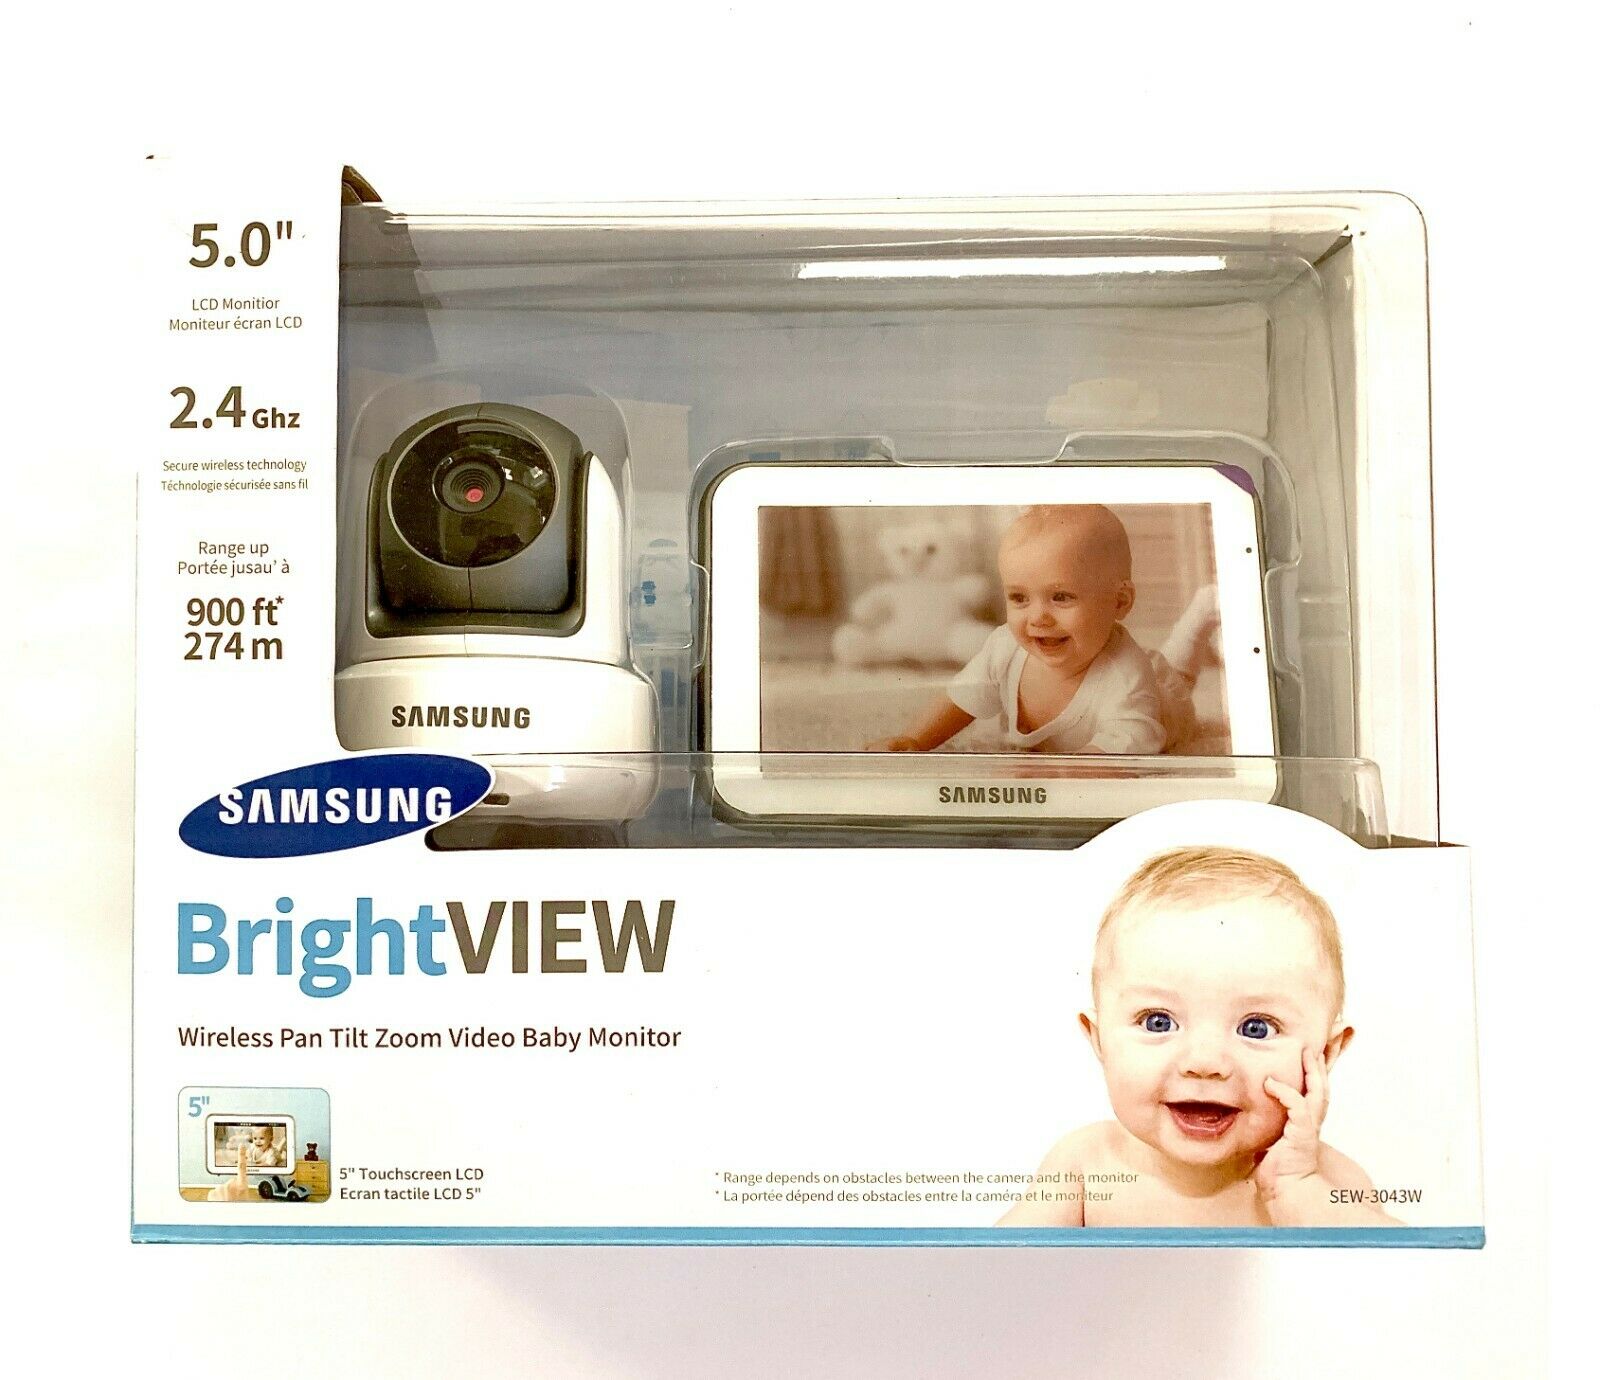 Samsung Sew-3043w Bright View Baby Monitoring System Monitor And Camera